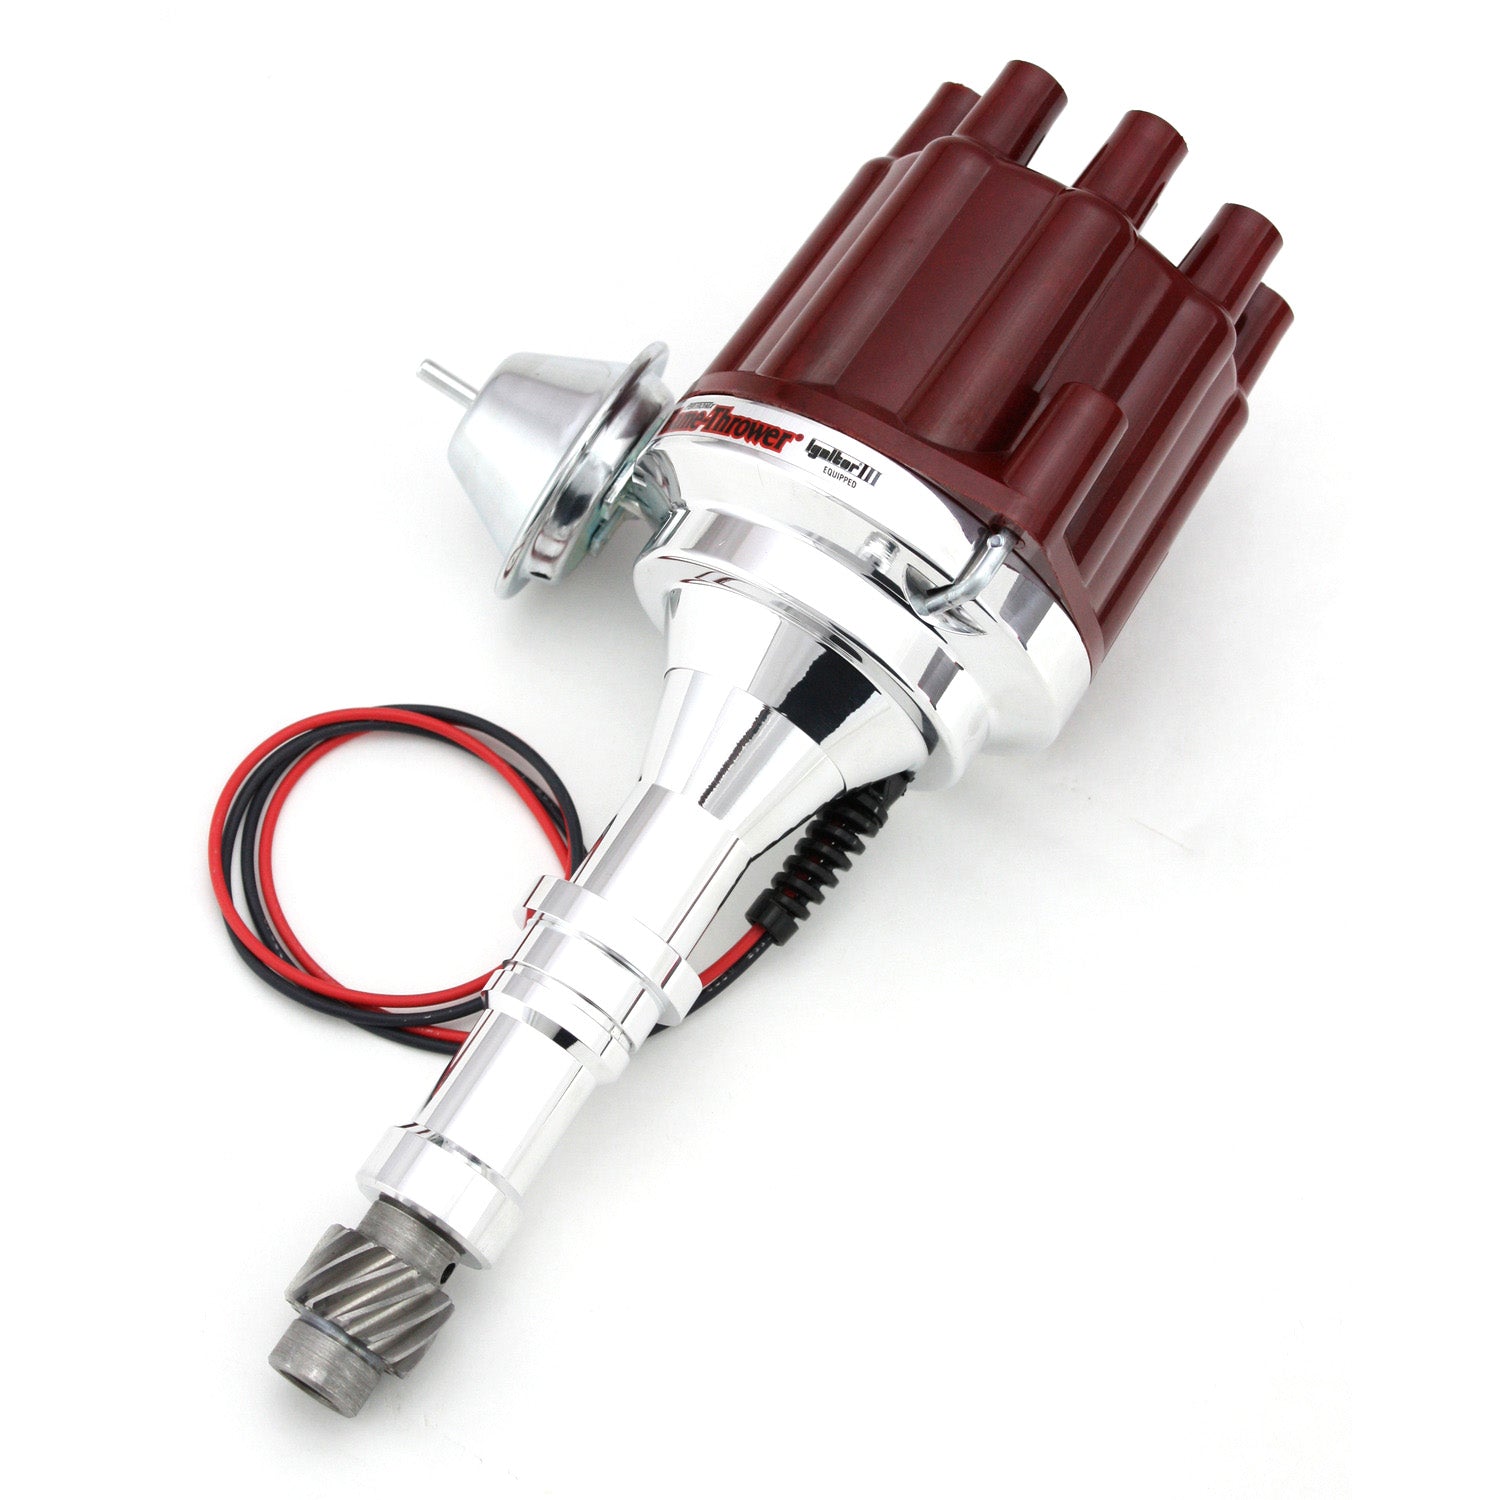 PerTronix D7150701 Flame-Thrower Electronic Distributor Billet Buick V8 with Ignitor III Vacuum Advance Red Cap